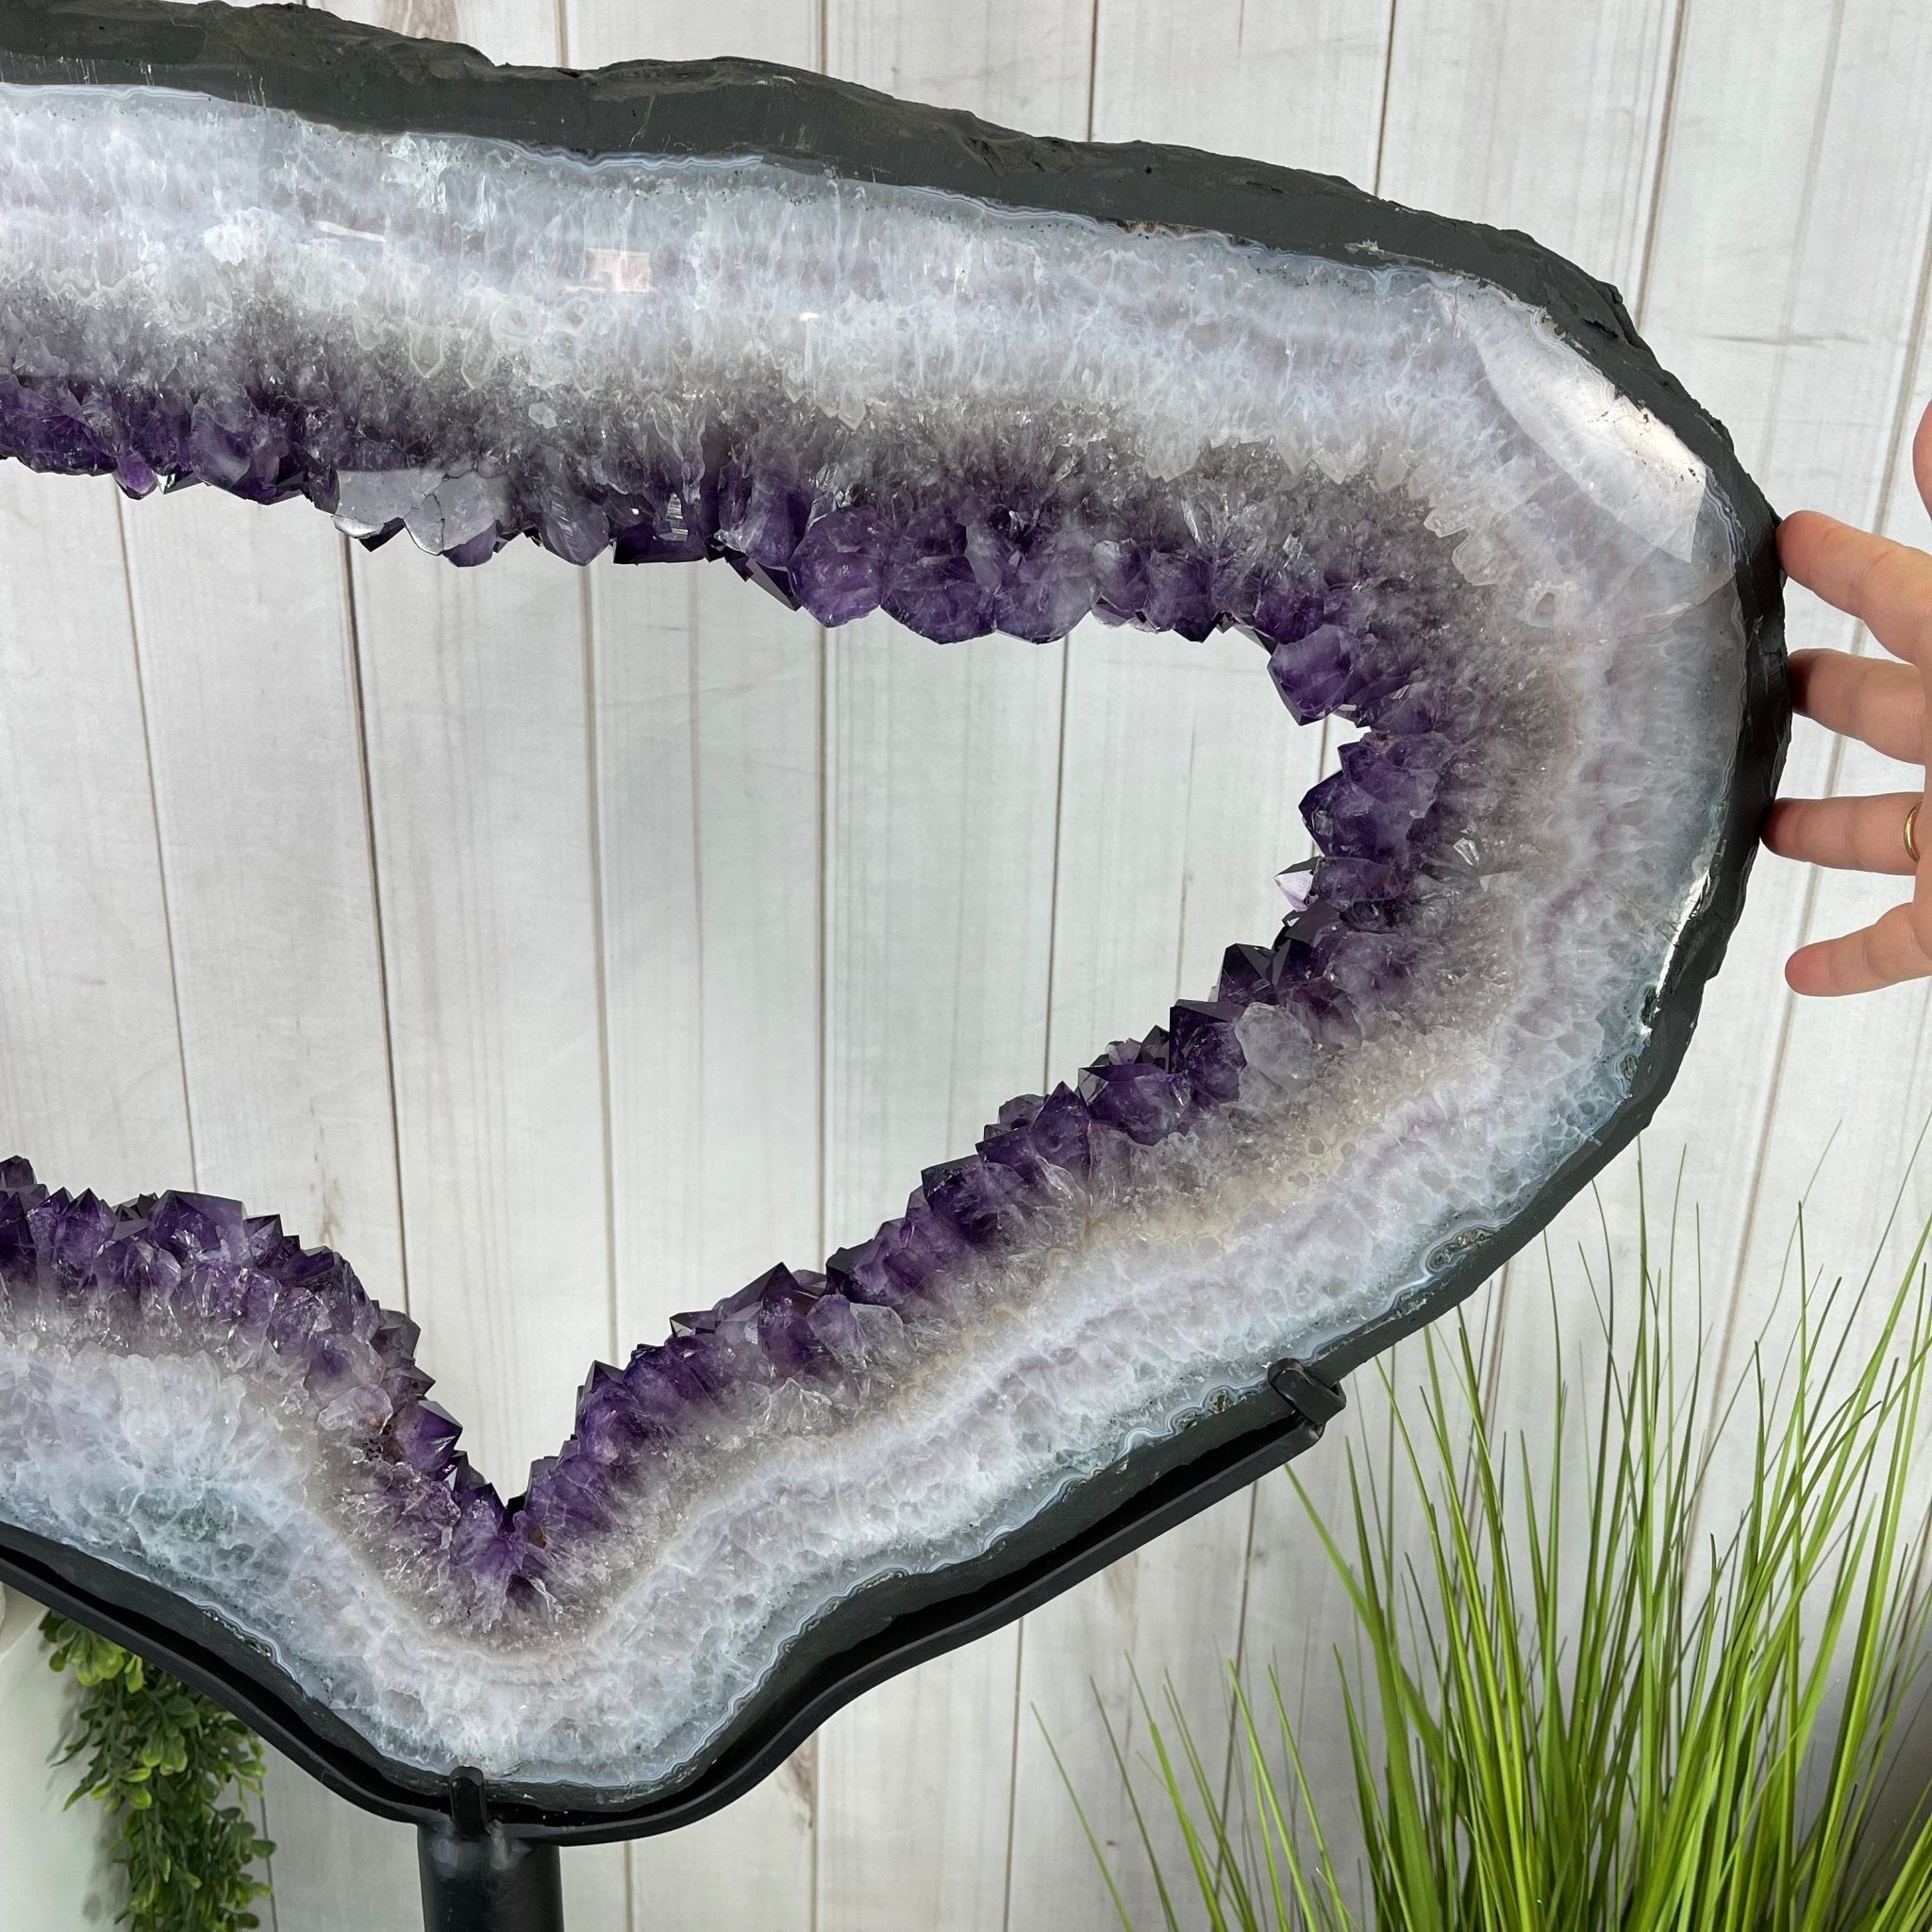 Super Quality Brazilian Amethyst Crystal Portal on a Tall Rotating Stand, 66.8 lbs & 61.9" tall Model #5604-0106 by Brazil Gems - Brazil GemsBrazil GemsSuper Quality Brazilian Amethyst Crystal Portal on a Tall Rotating Stand, 66.8 lbs & 61.9" tall Model #5604-0106 by Brazil GemsPortals on Rotating Bases5604-0106